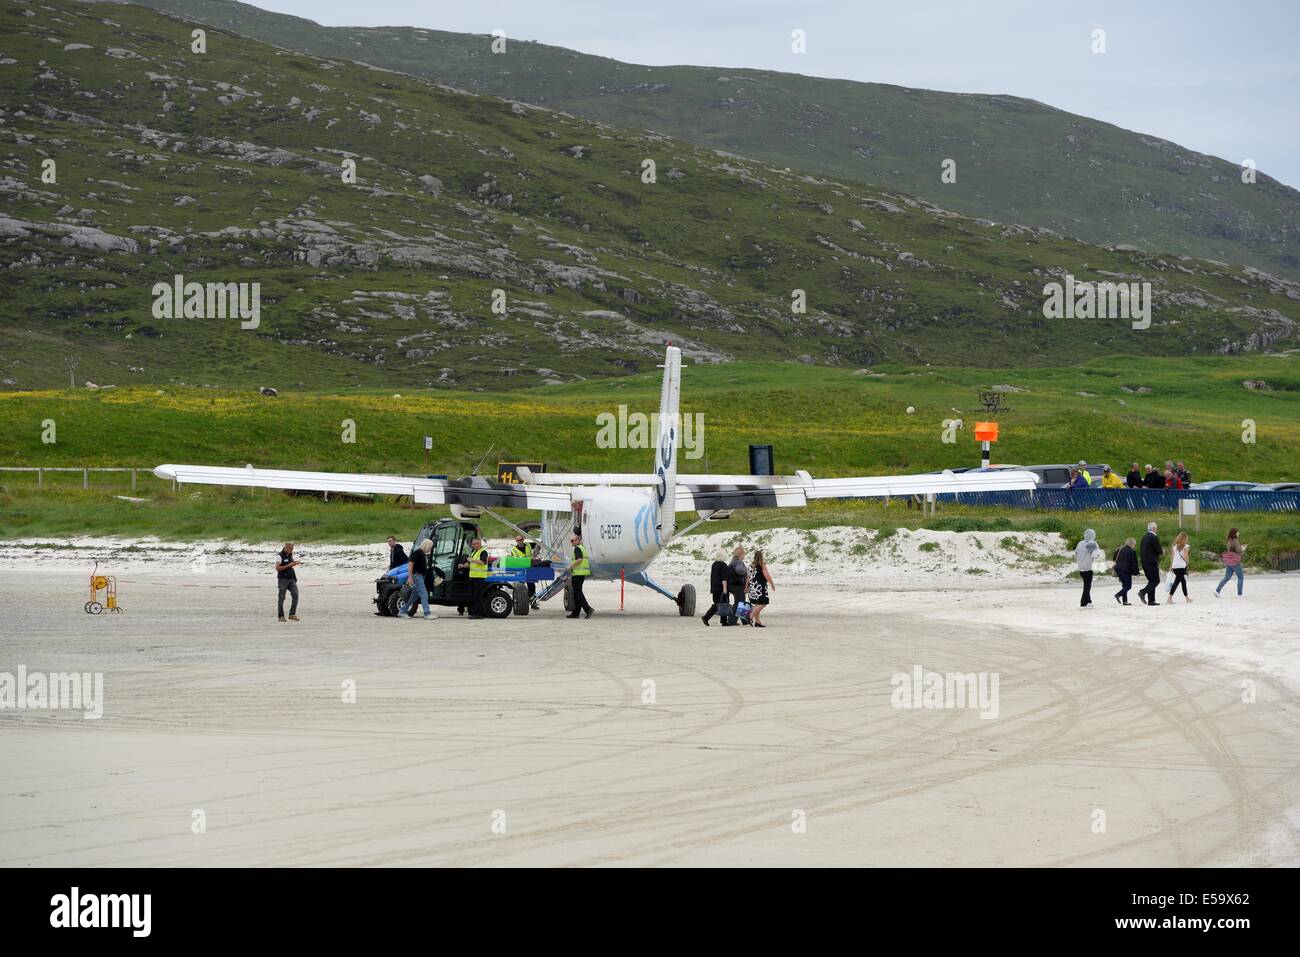 Passengers disembarking the aircraft which has just landed on the beach at Barra airport in the Outer Hebrides, in Scotland Stock Photo